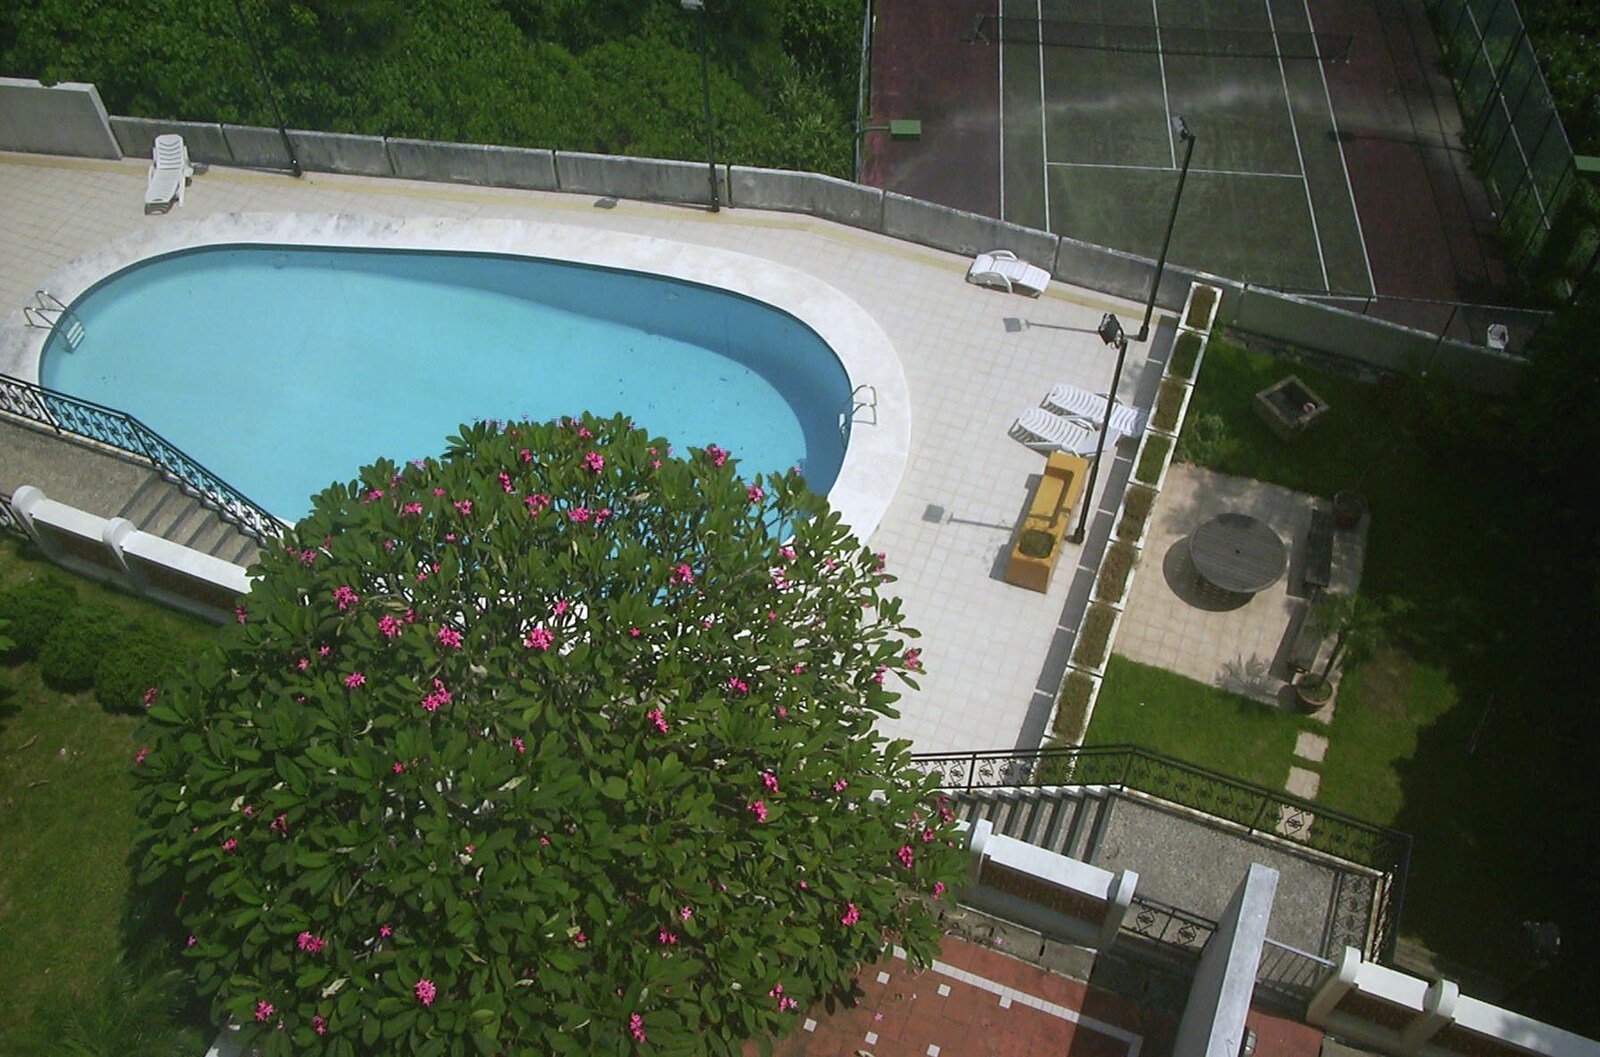 A Trip to Hong Kong, China - 11th August 2001: The view of the swimming pool, from the top of the house